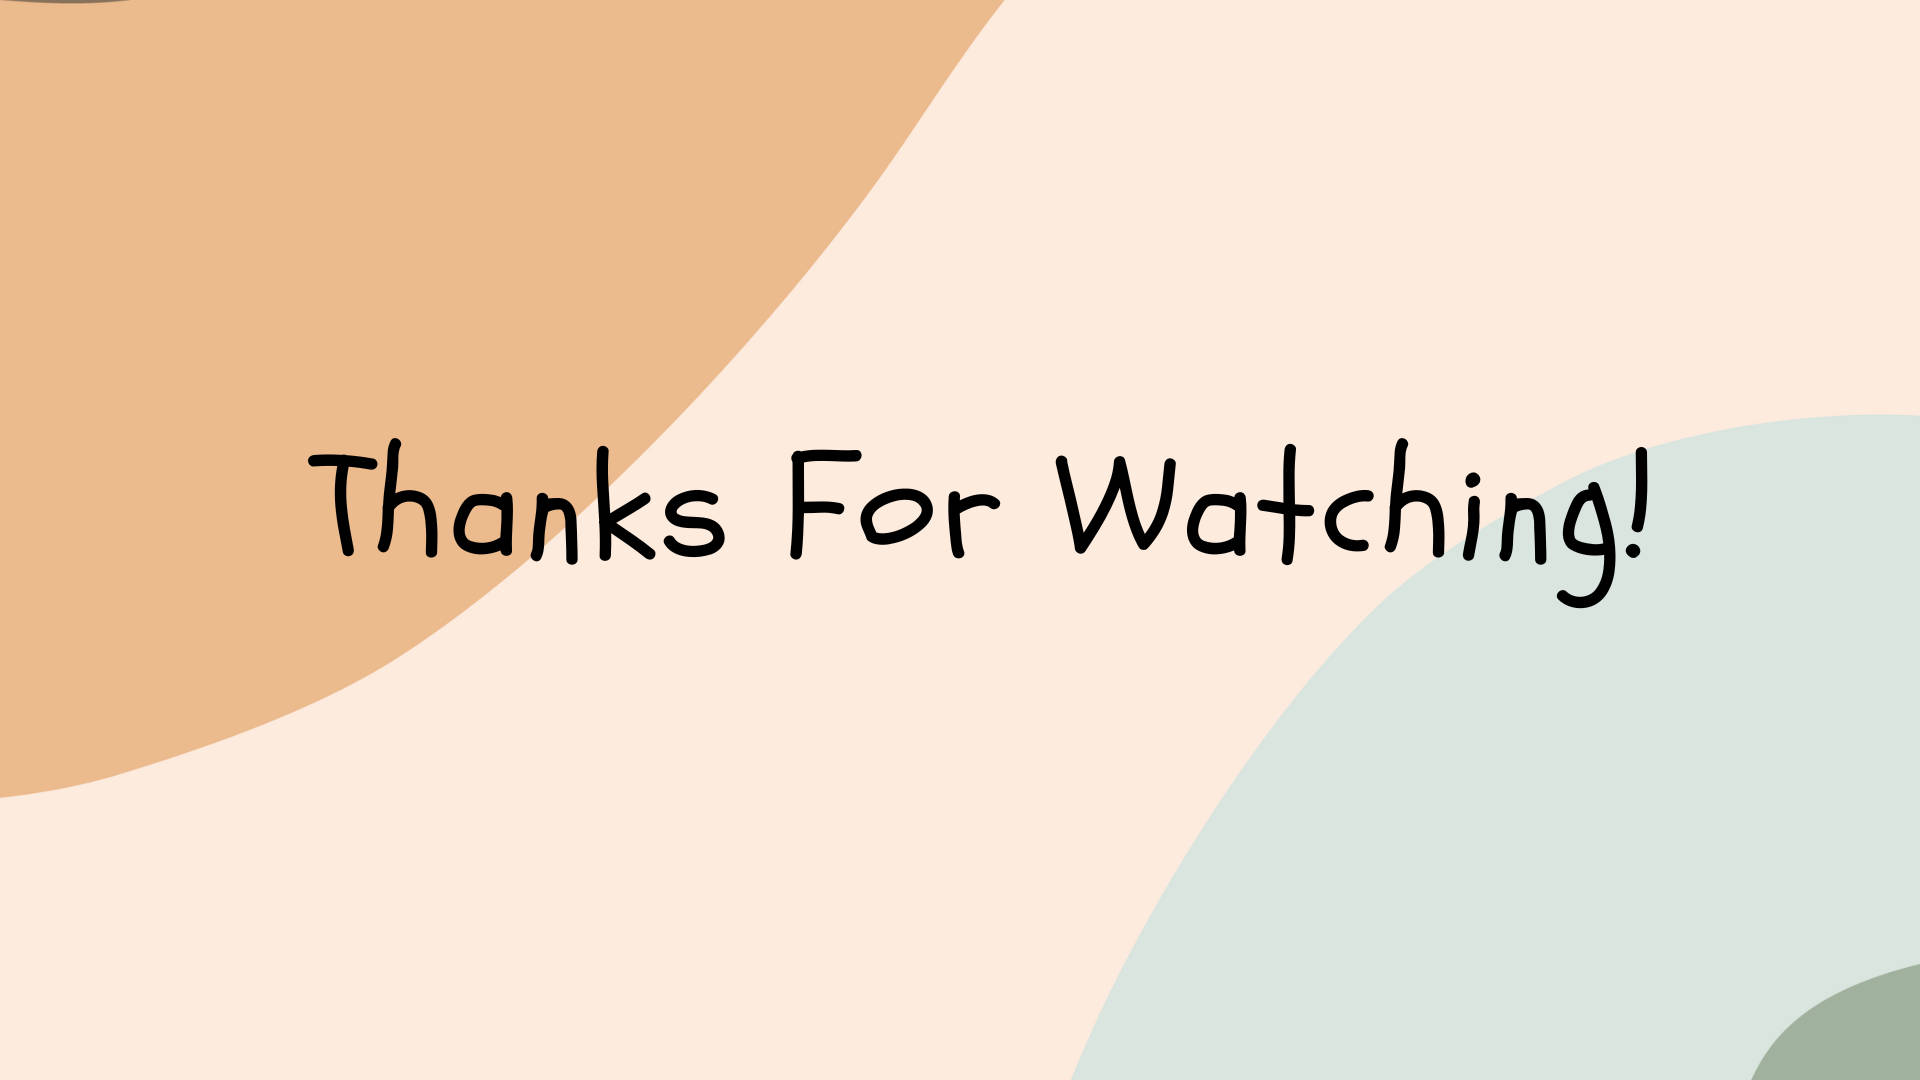 Captivating Thank You For Watching Message In Pastel Background